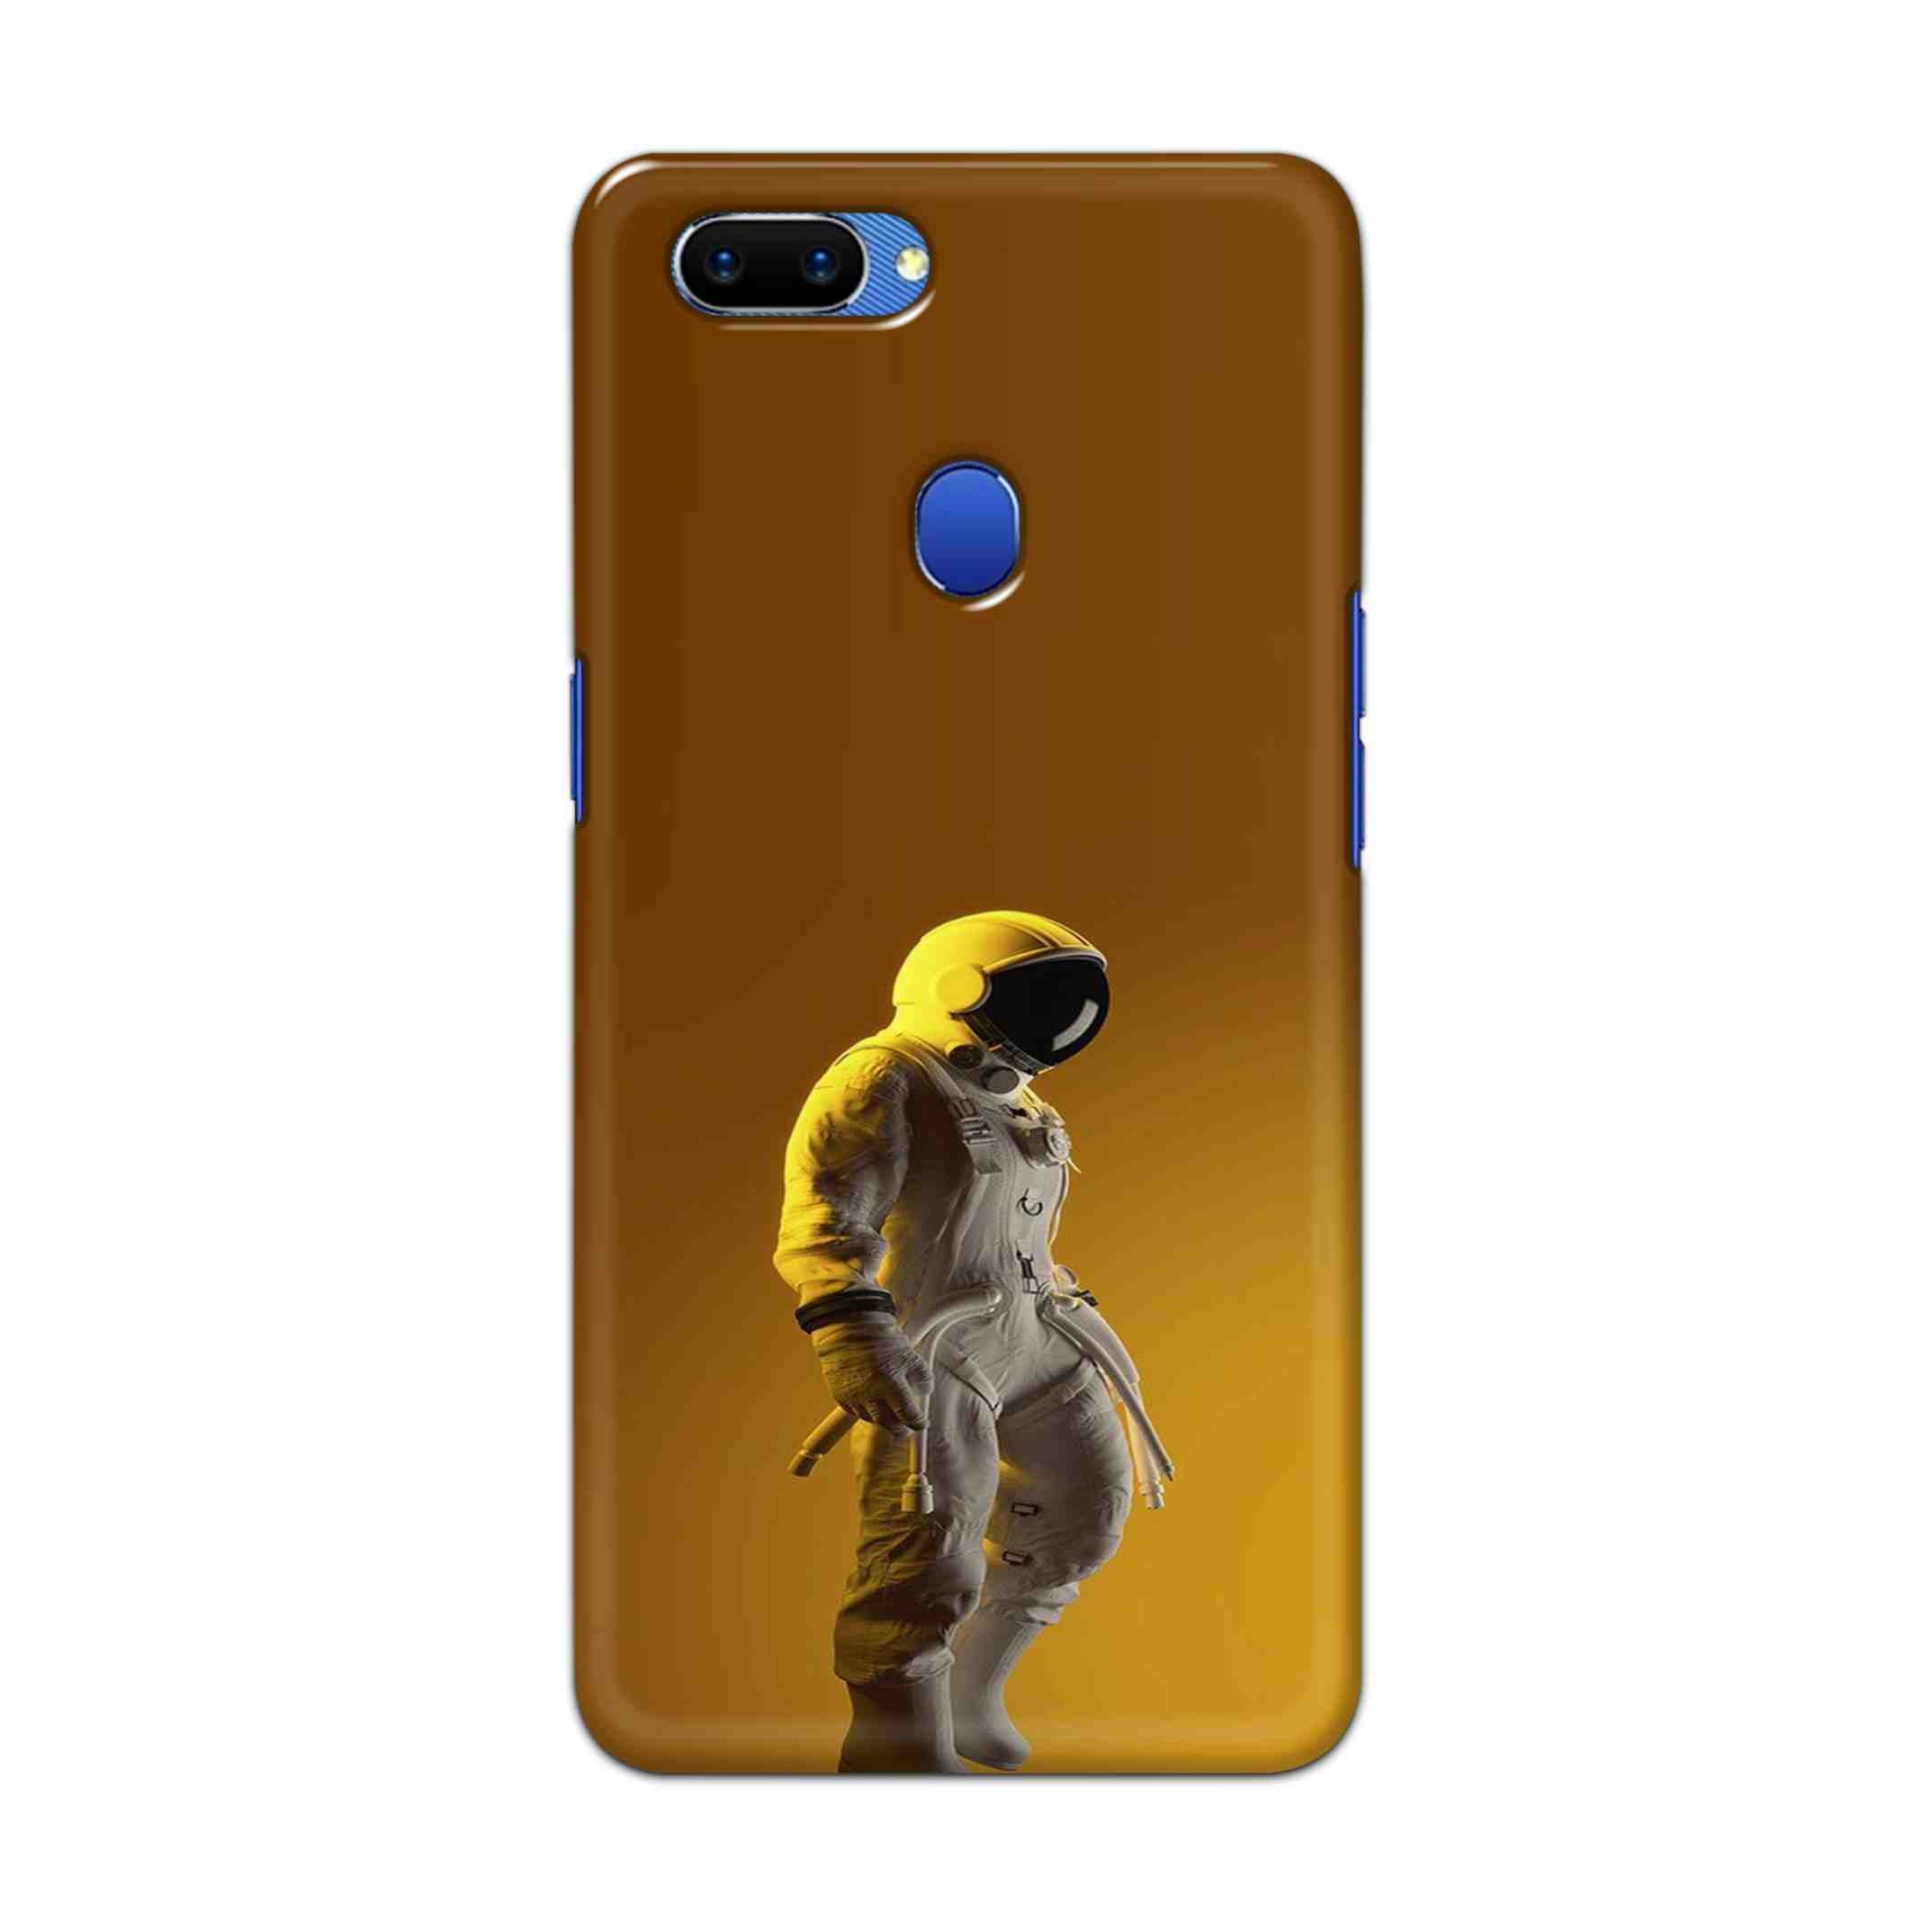 Buy Yellow Astronaut Hard Back Mobile Phone Case Cover For Oppo A5 Online